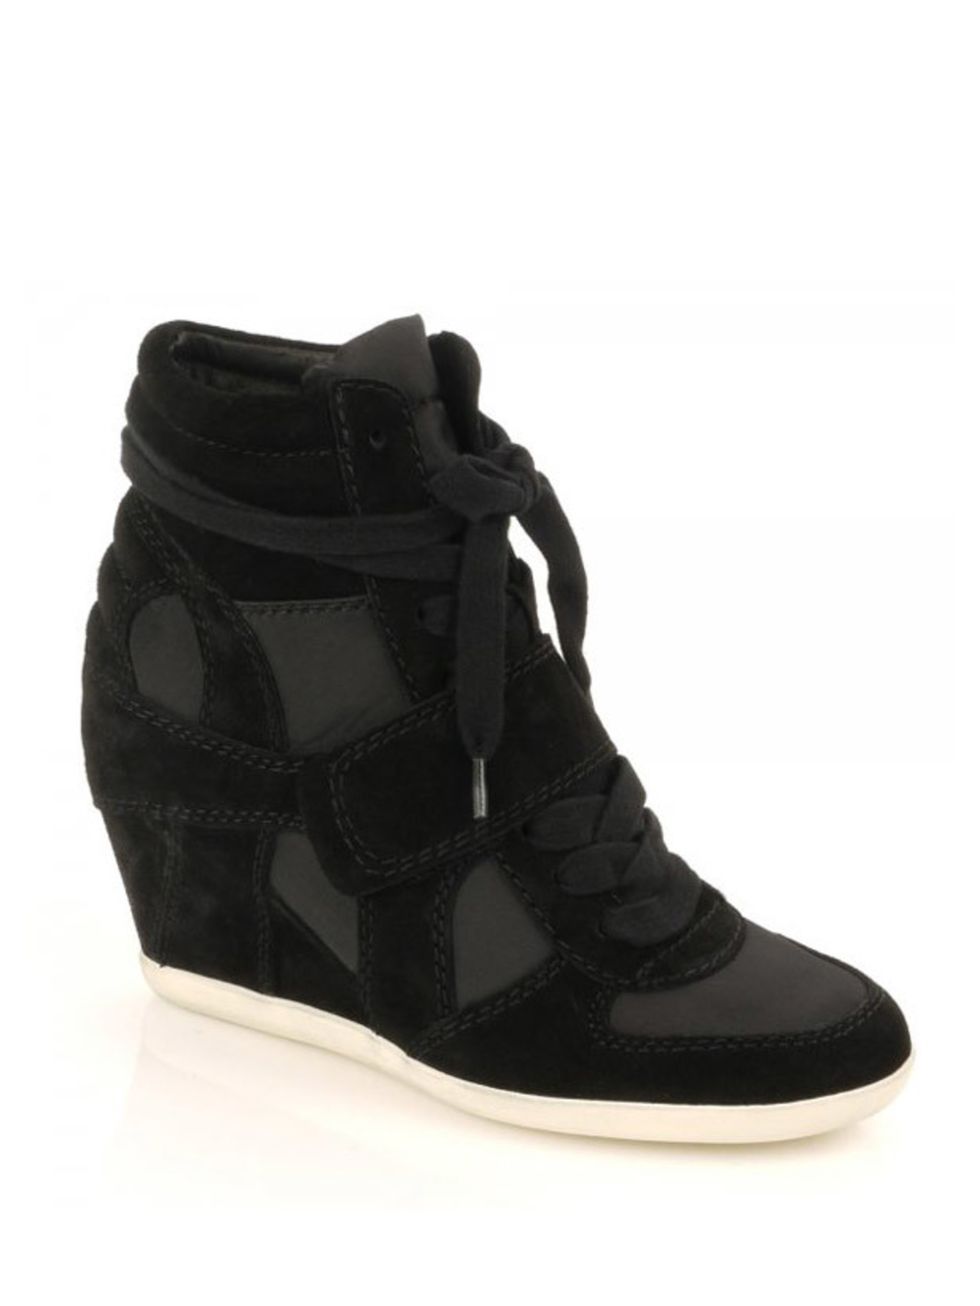 <p>Wedge trainers are the new must-have footwear amongst the fashion pack, so get in on the act early with this on-trend pair by ASH <a href="http://www.ashfootwear.co.uk/womens-c1/wedges-c22/ash-biba-low-wedge-black-suede-nylon-trainer-p204">ASH</a> sue